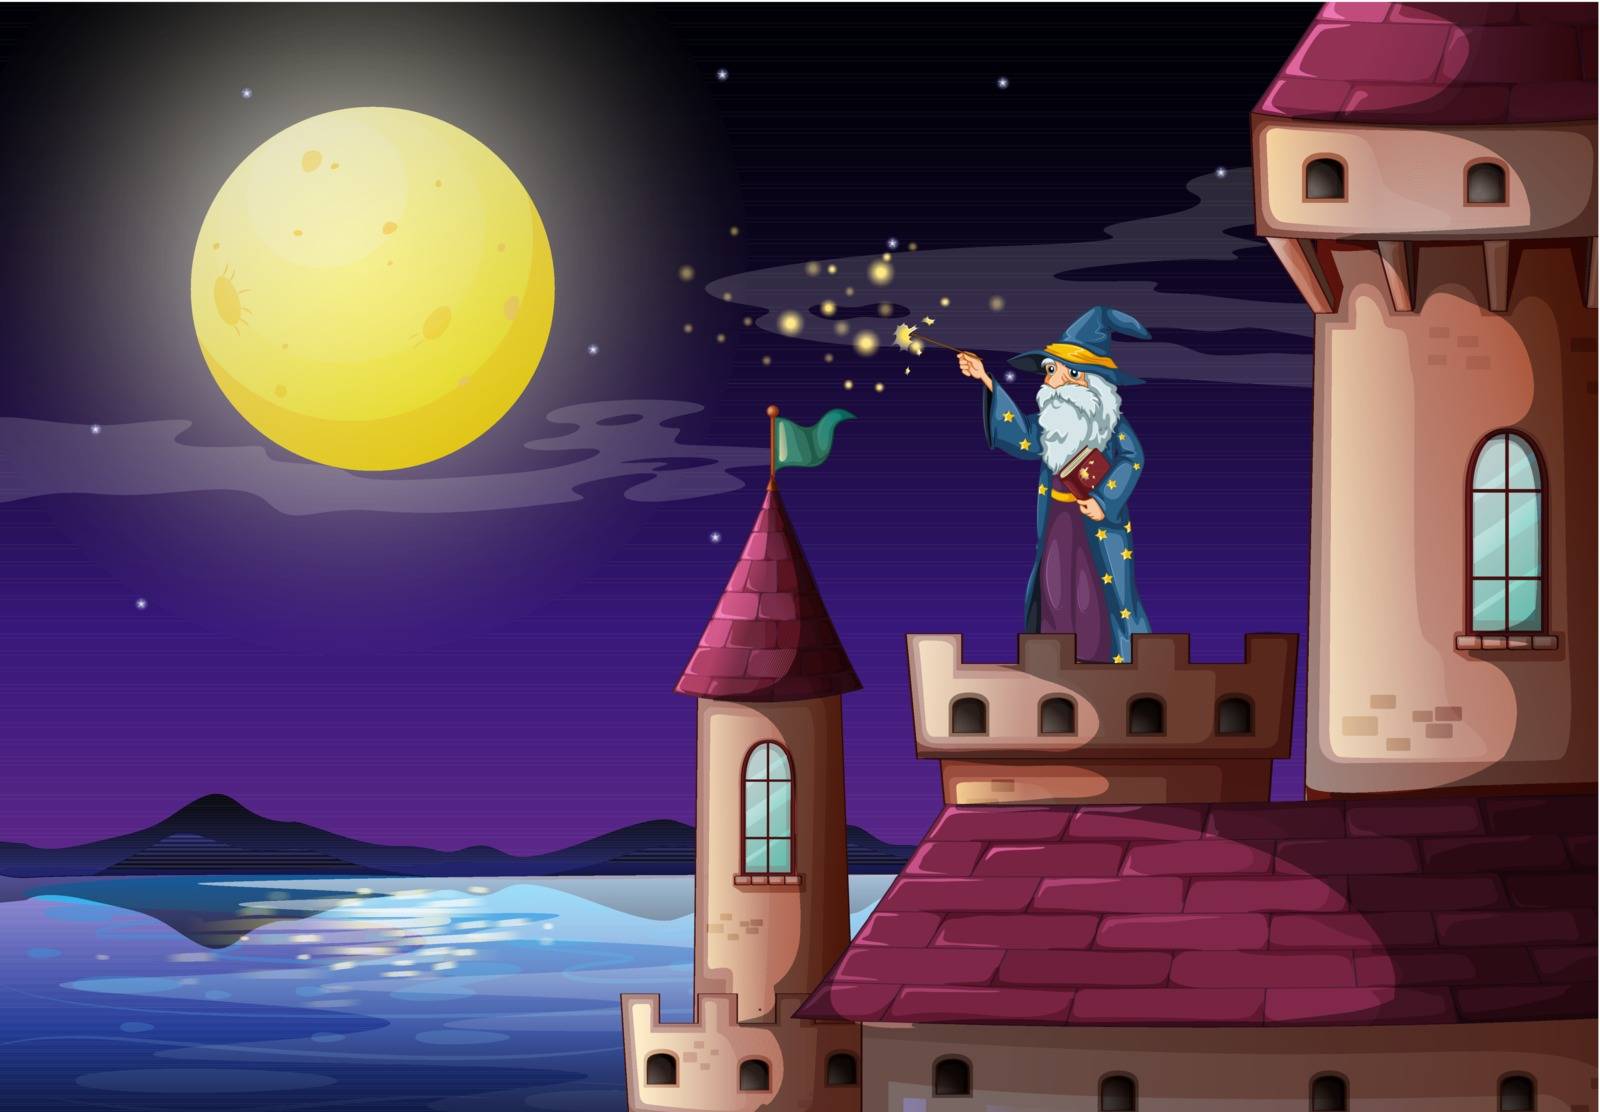 Illustration of a wizard in the castle's tower